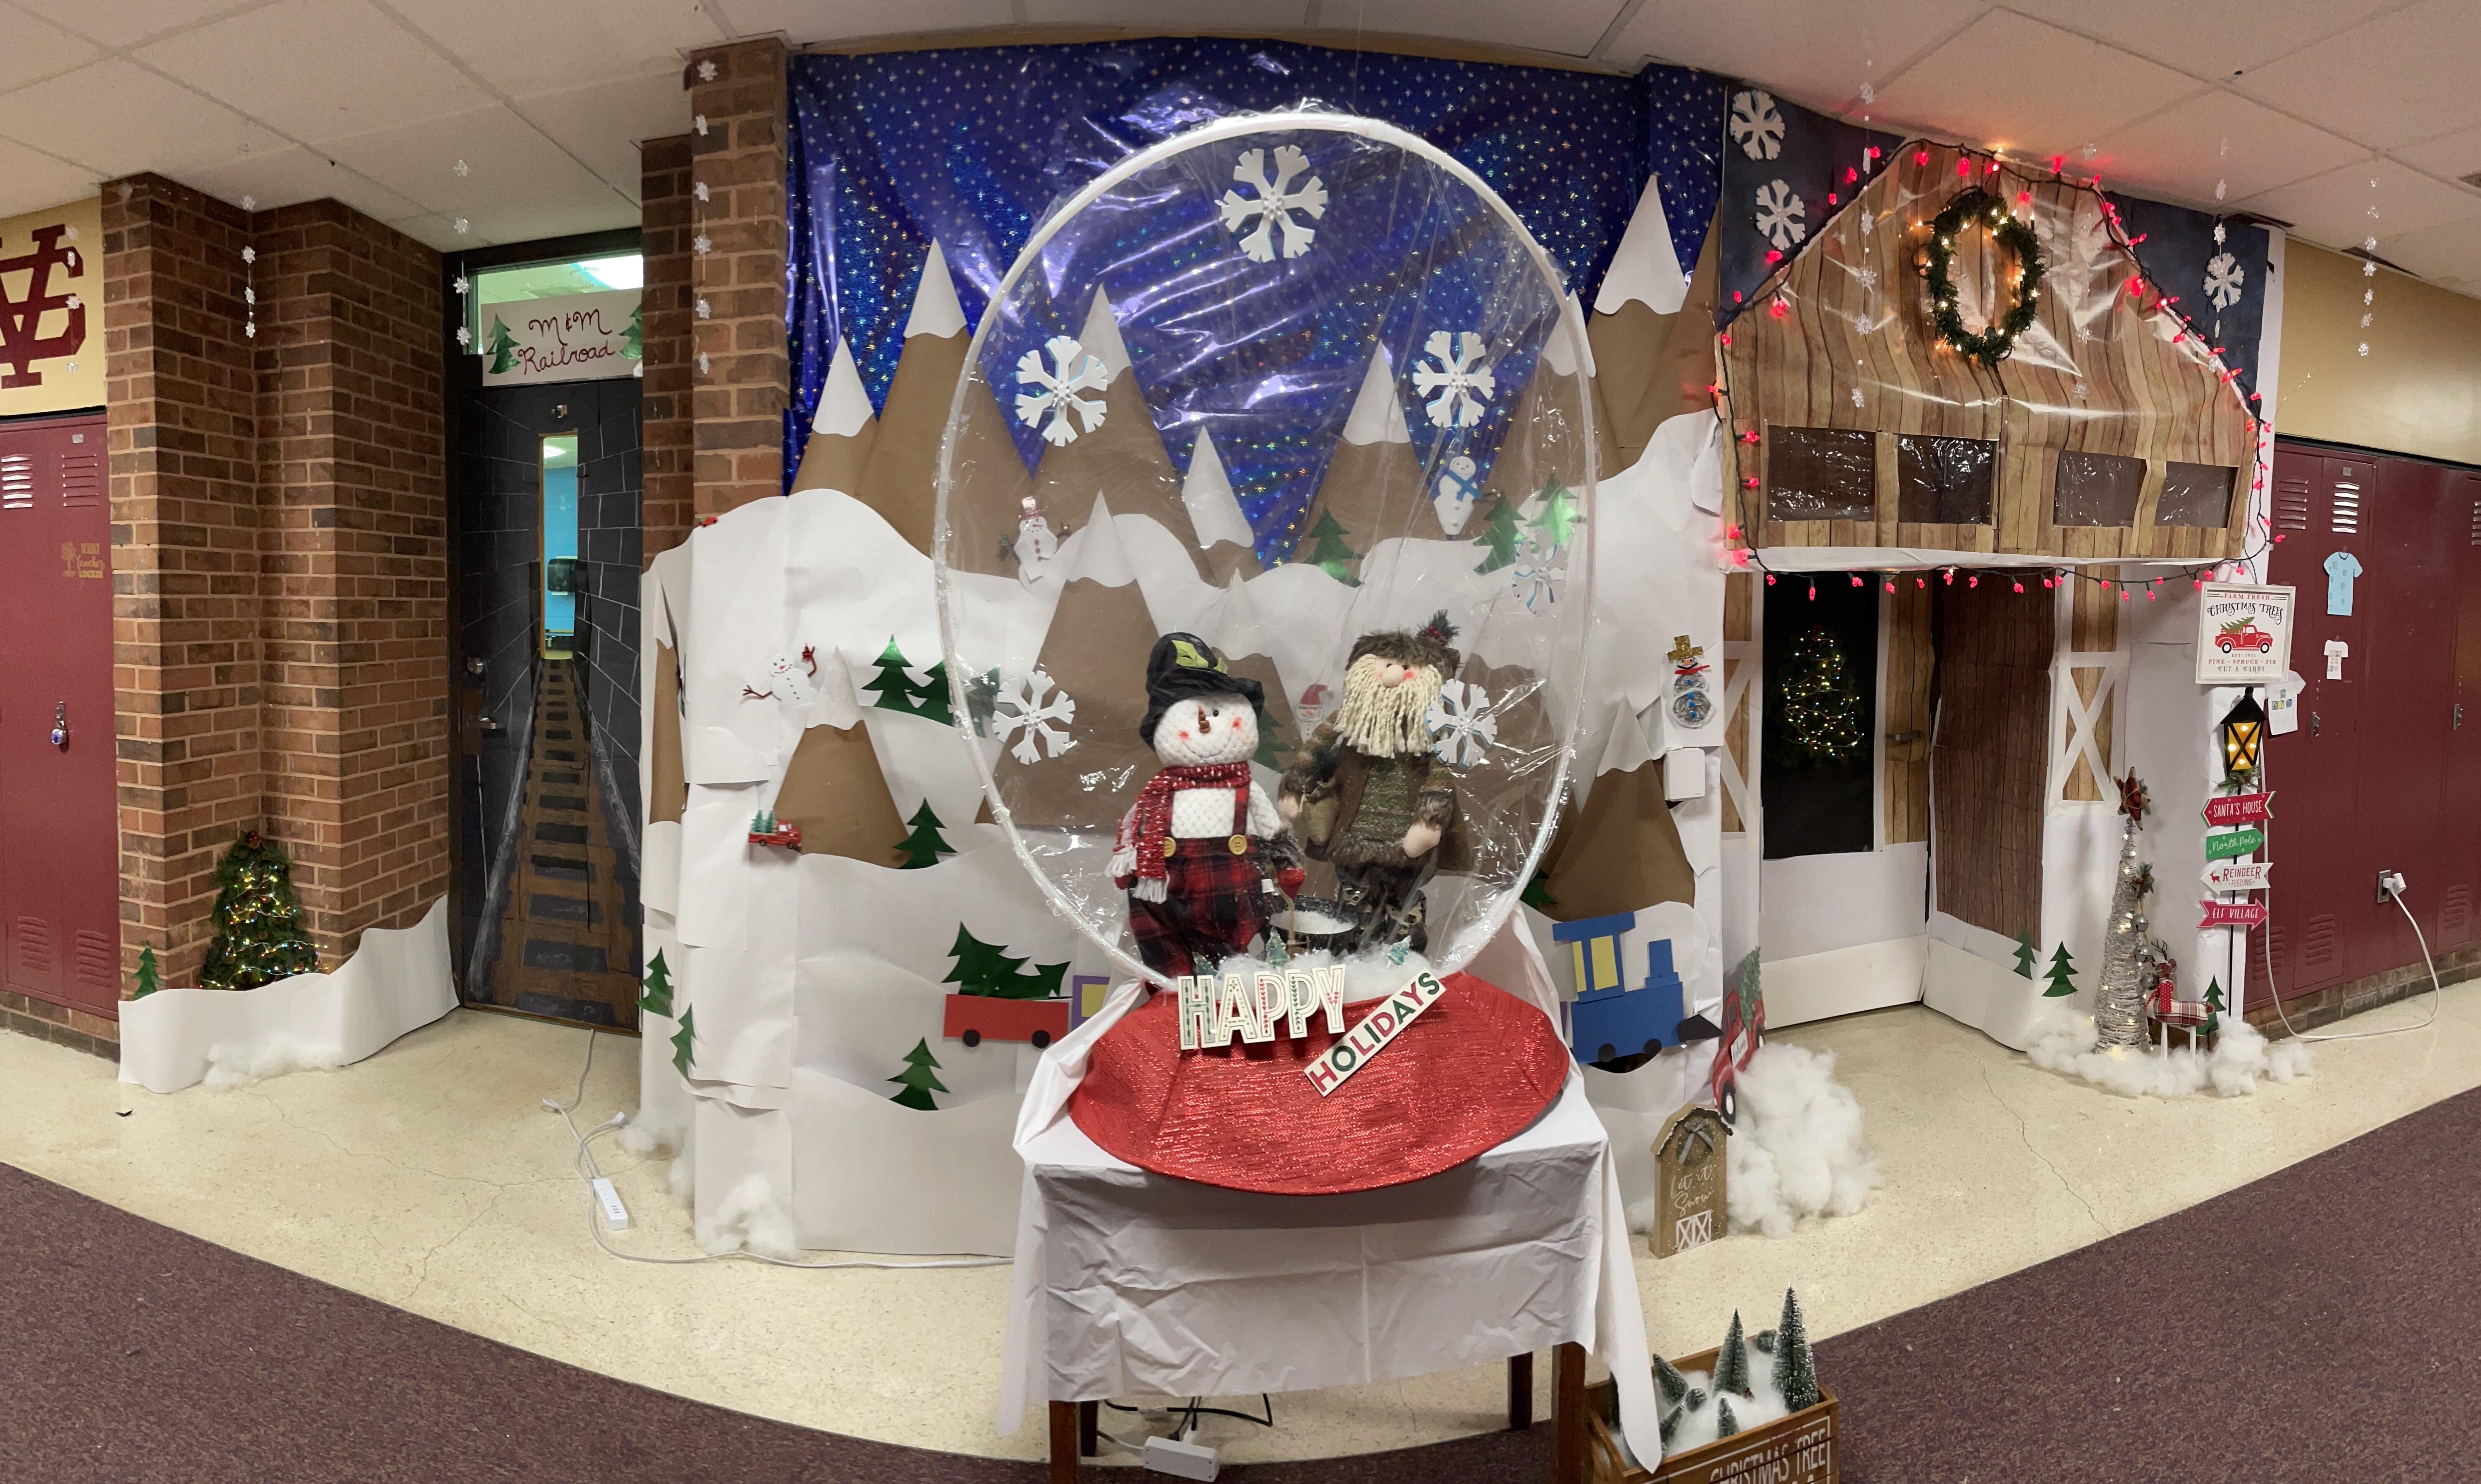 Two classroom doors are decorated to celebrate the holiday season. There is a giant piece of clear, circular plastic in front of them to make it look like a snowglobe.